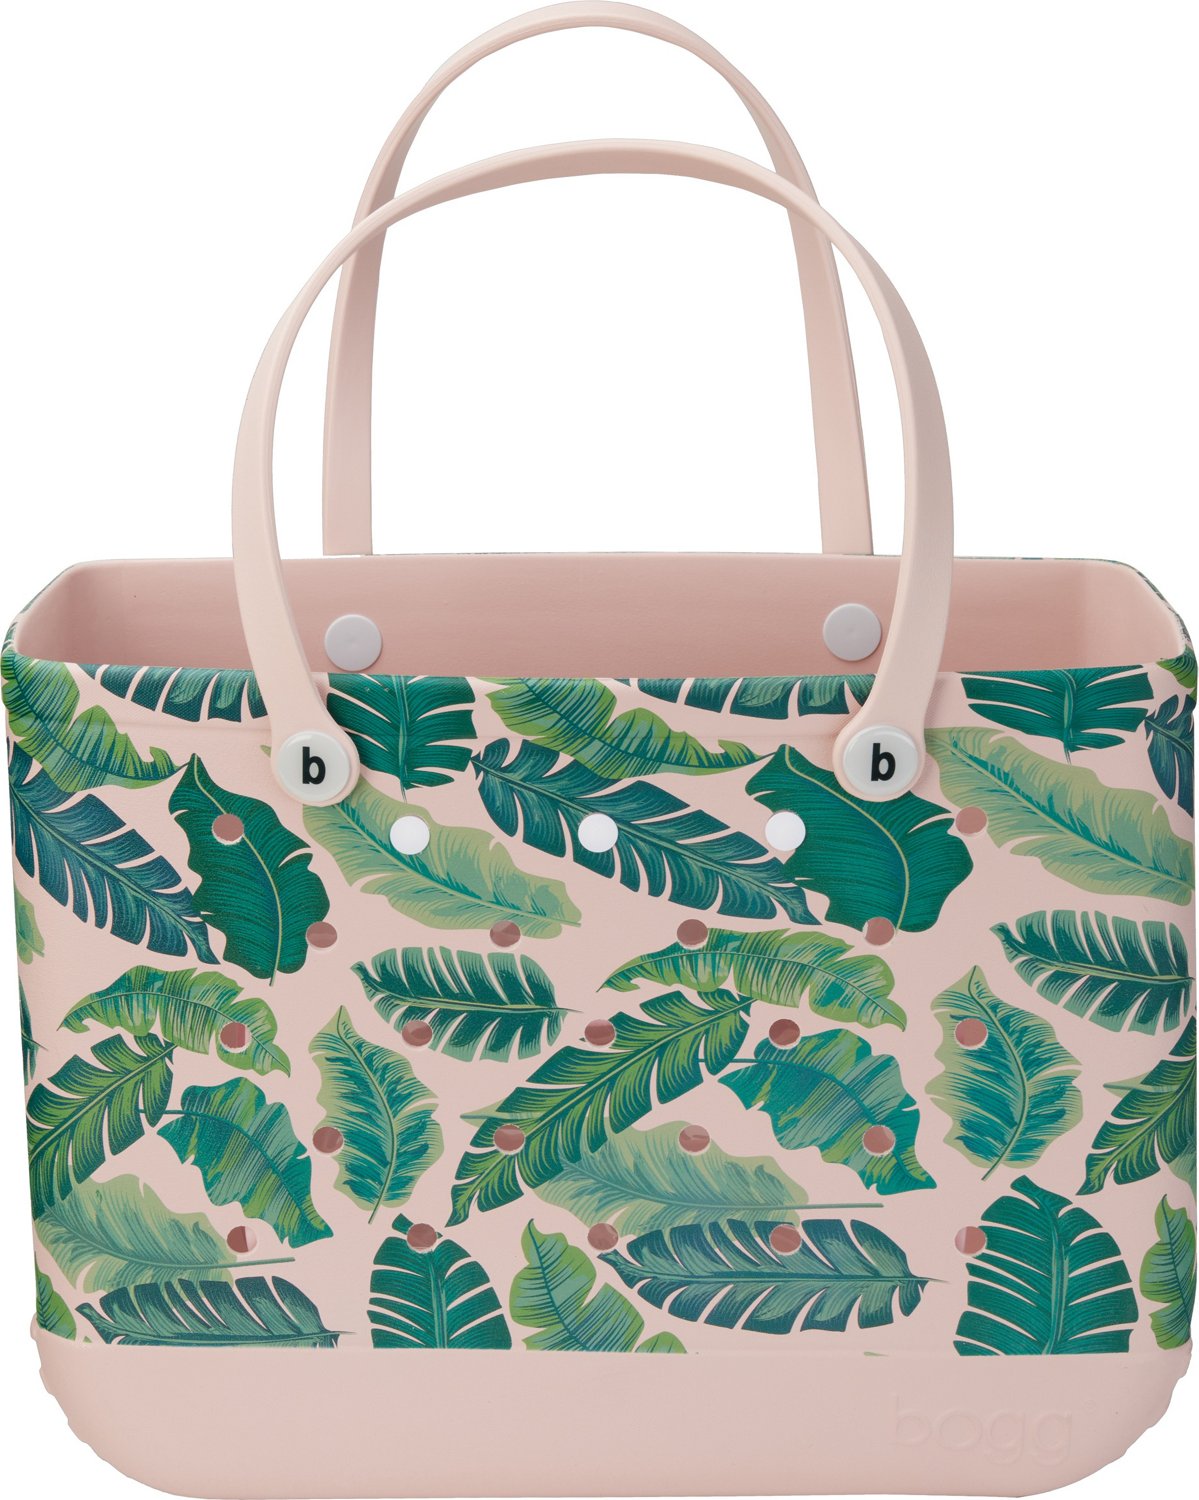 NWT Baby Bogg Bag Palm Leaf Print Limited Edition Small Tote